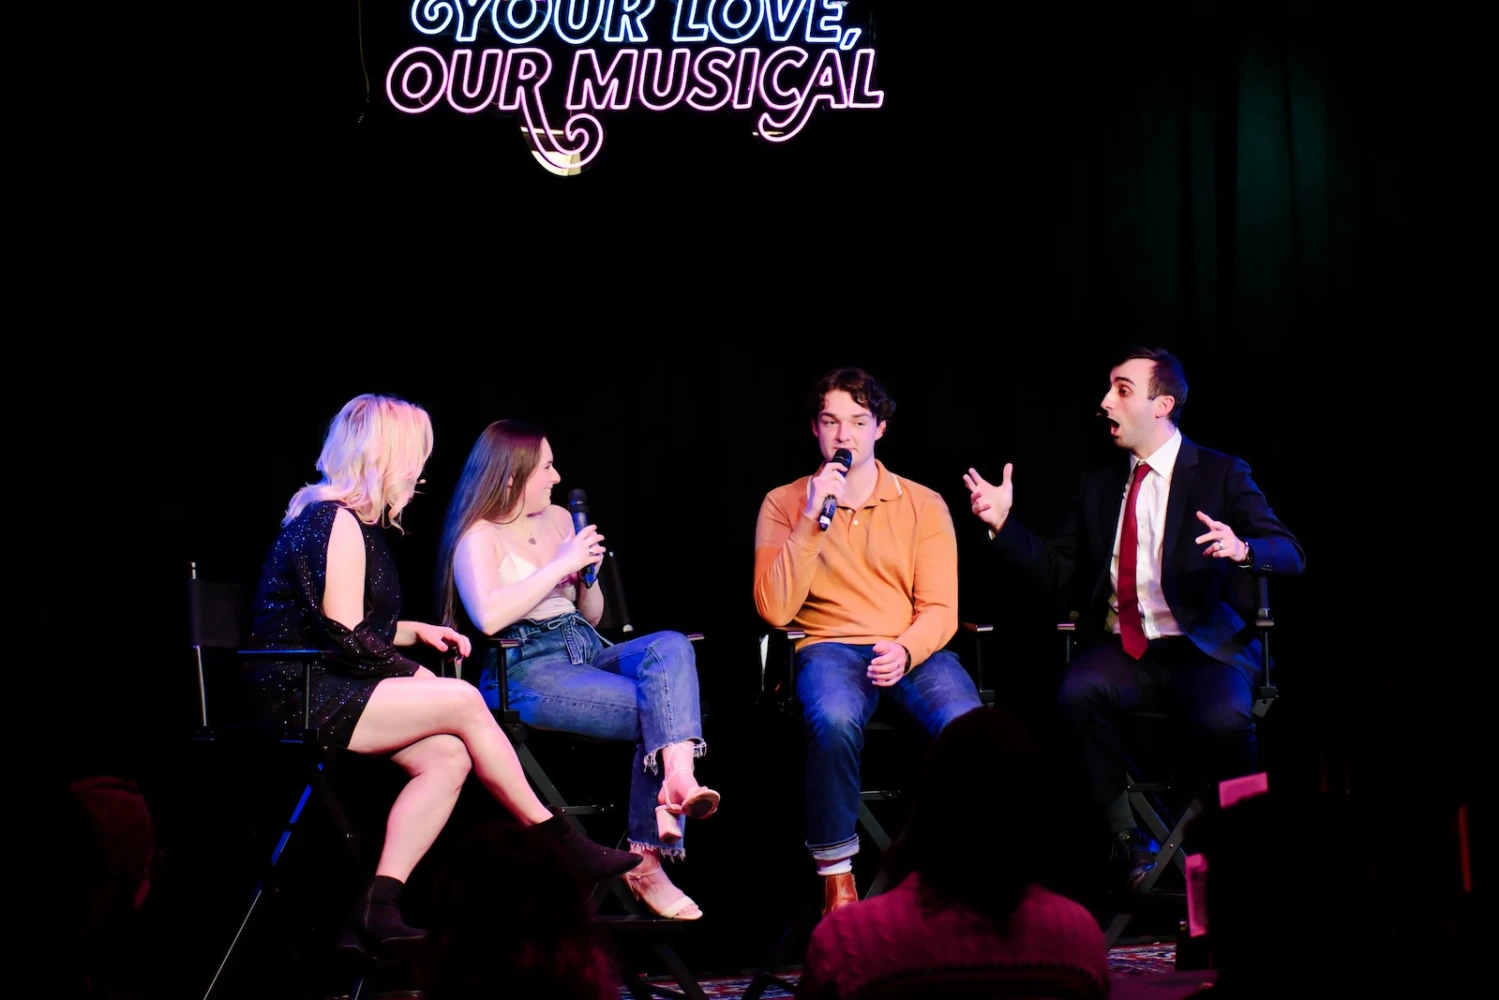 Your Love, Our Musical: What to expect - 2